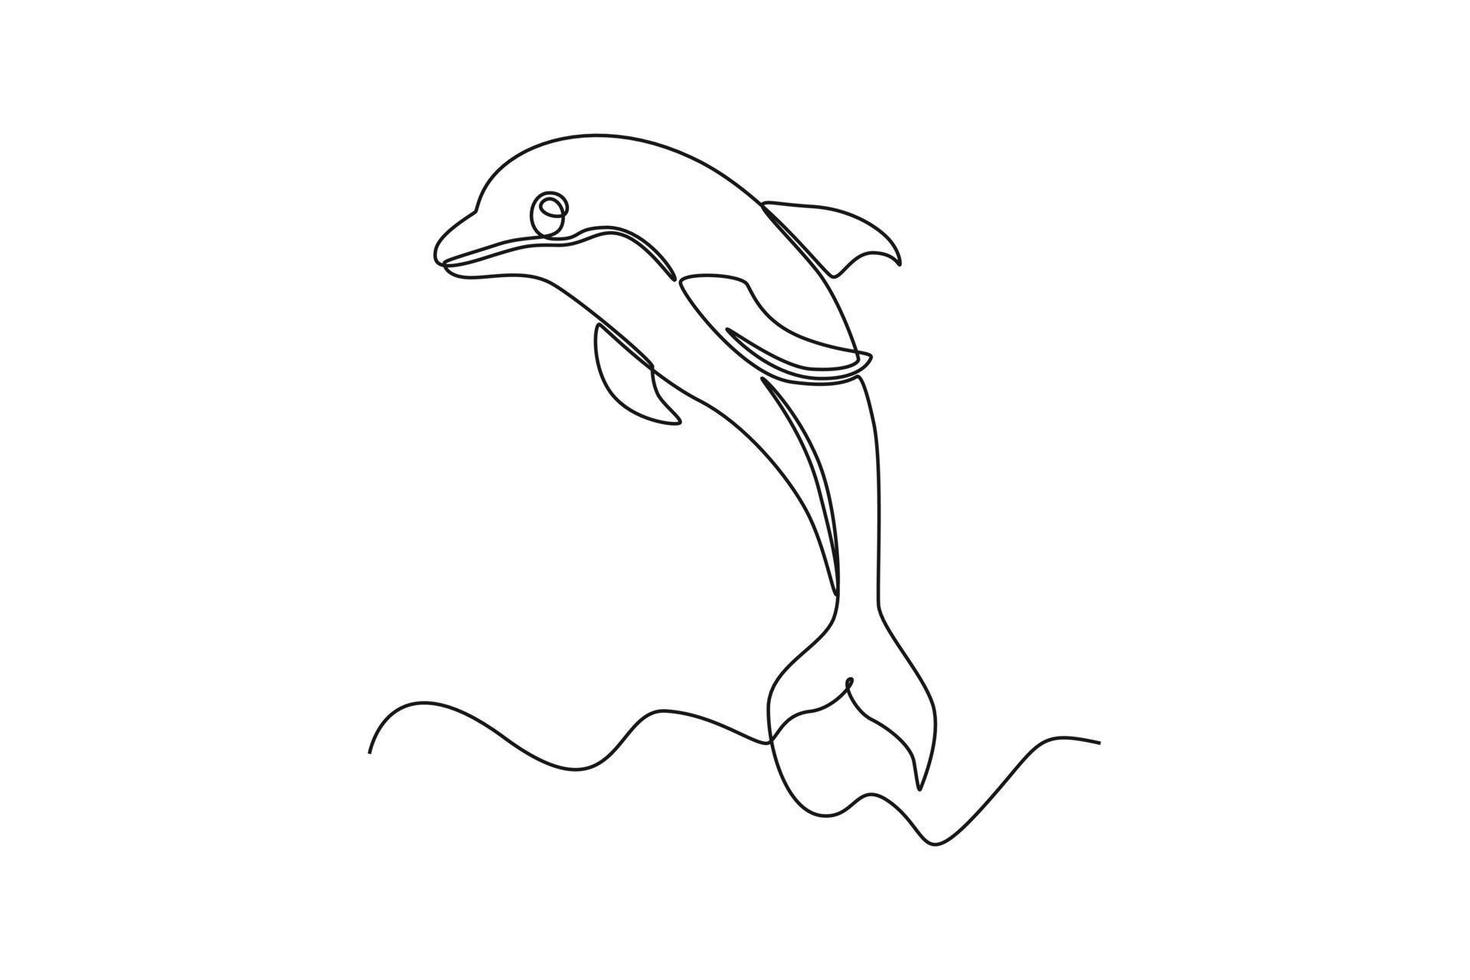 Continuous one-line drawing a dolphin jumping in the sea Animals concept single line draw design graphic vector illustration